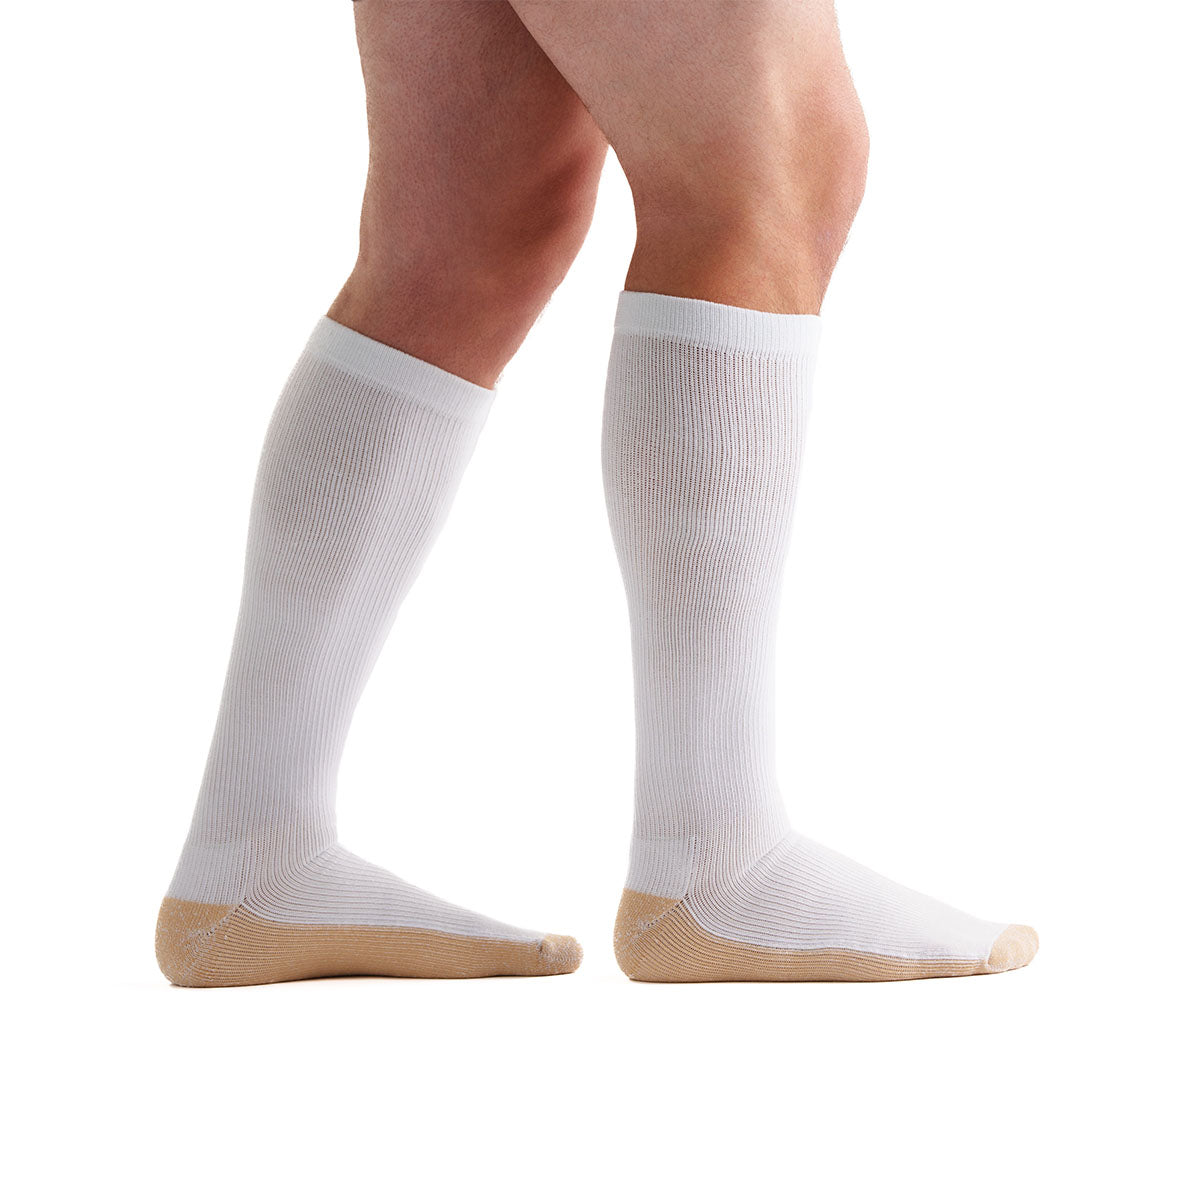 New Compression X COPPER Socks OPEN TOE Knee High Leg Support Stockings  (S-XXL)